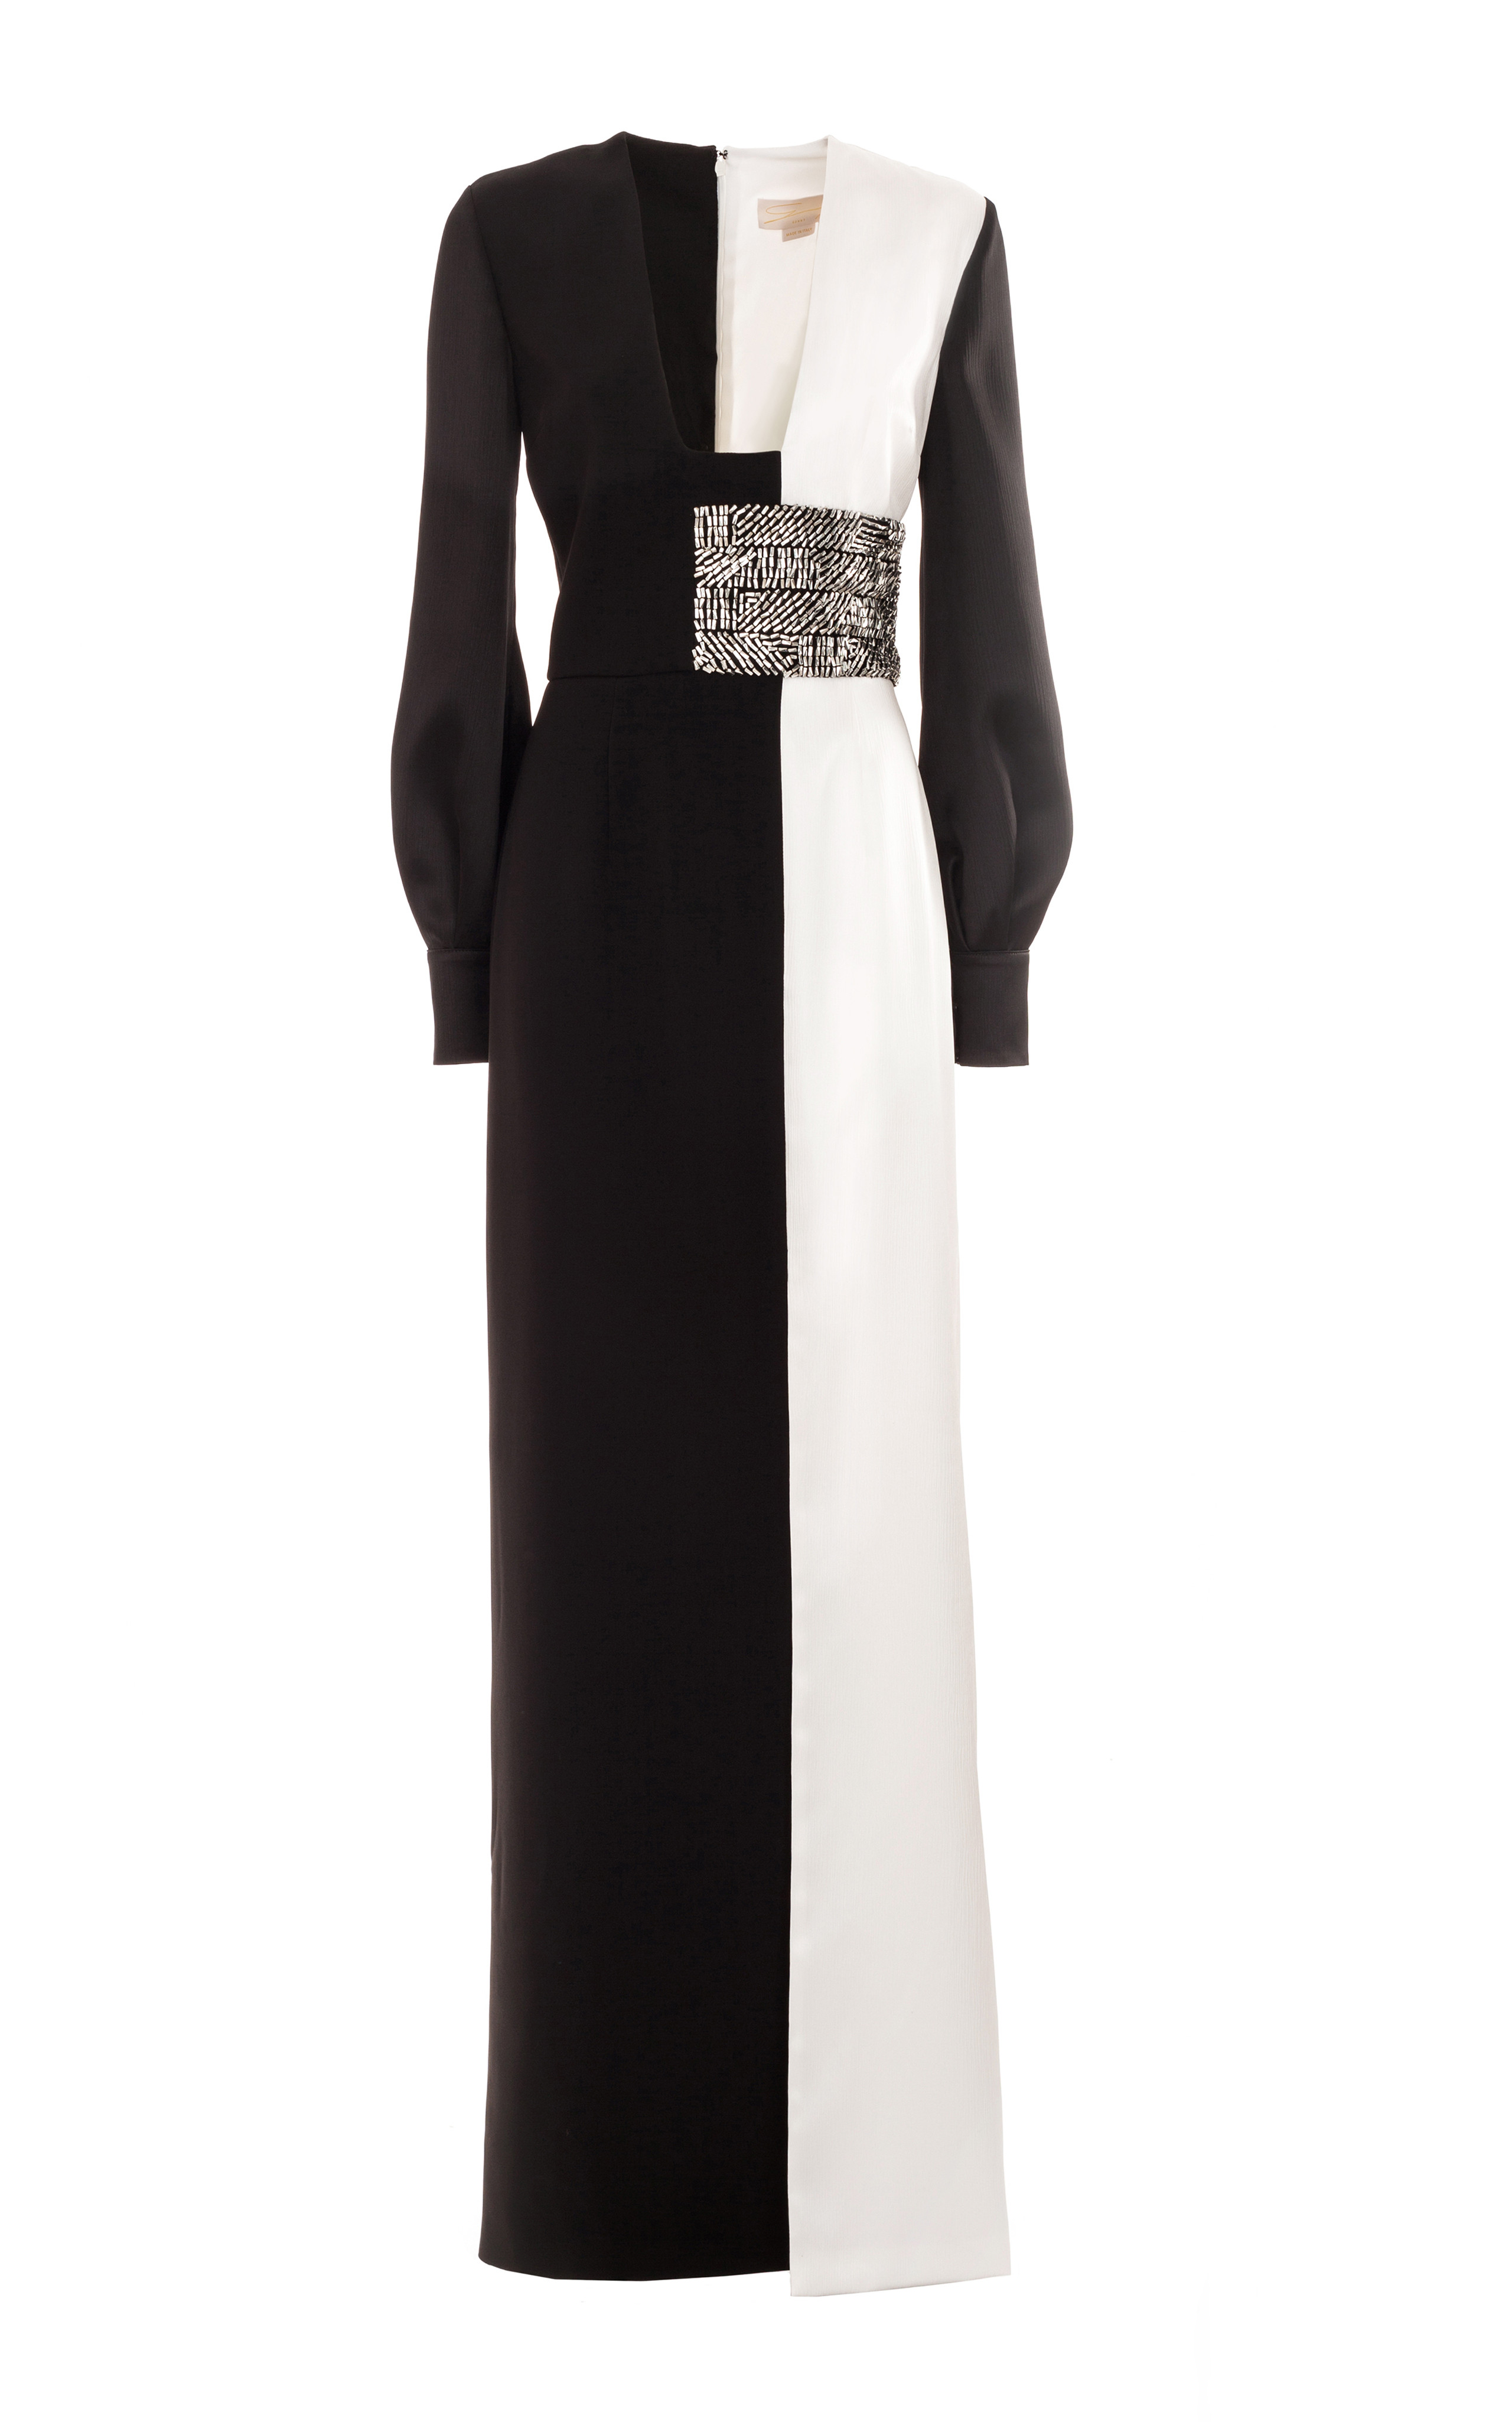 Black and white floor length gown